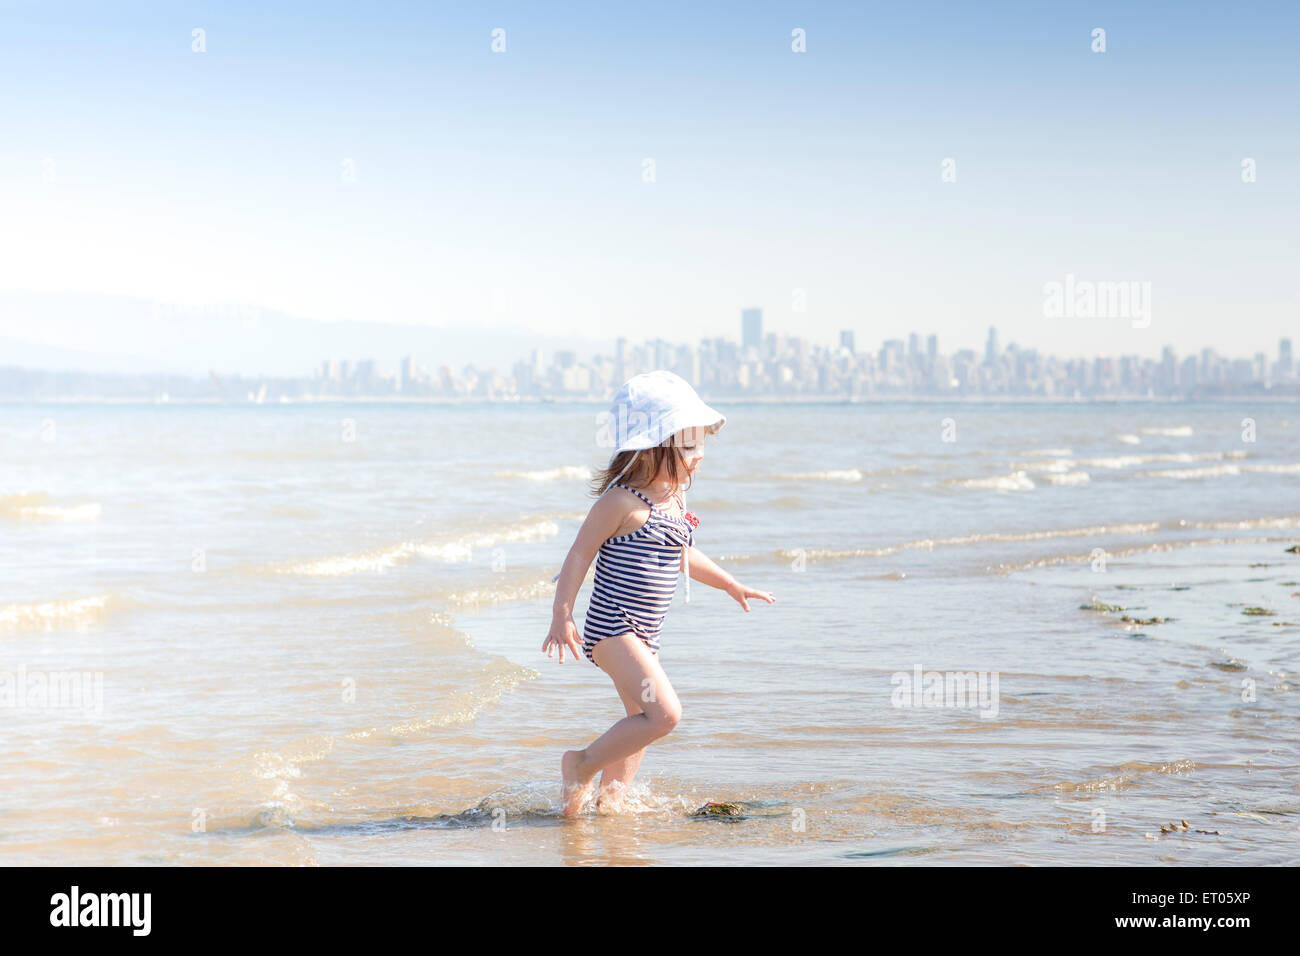 Girl wading in surf on beach Stock Photo